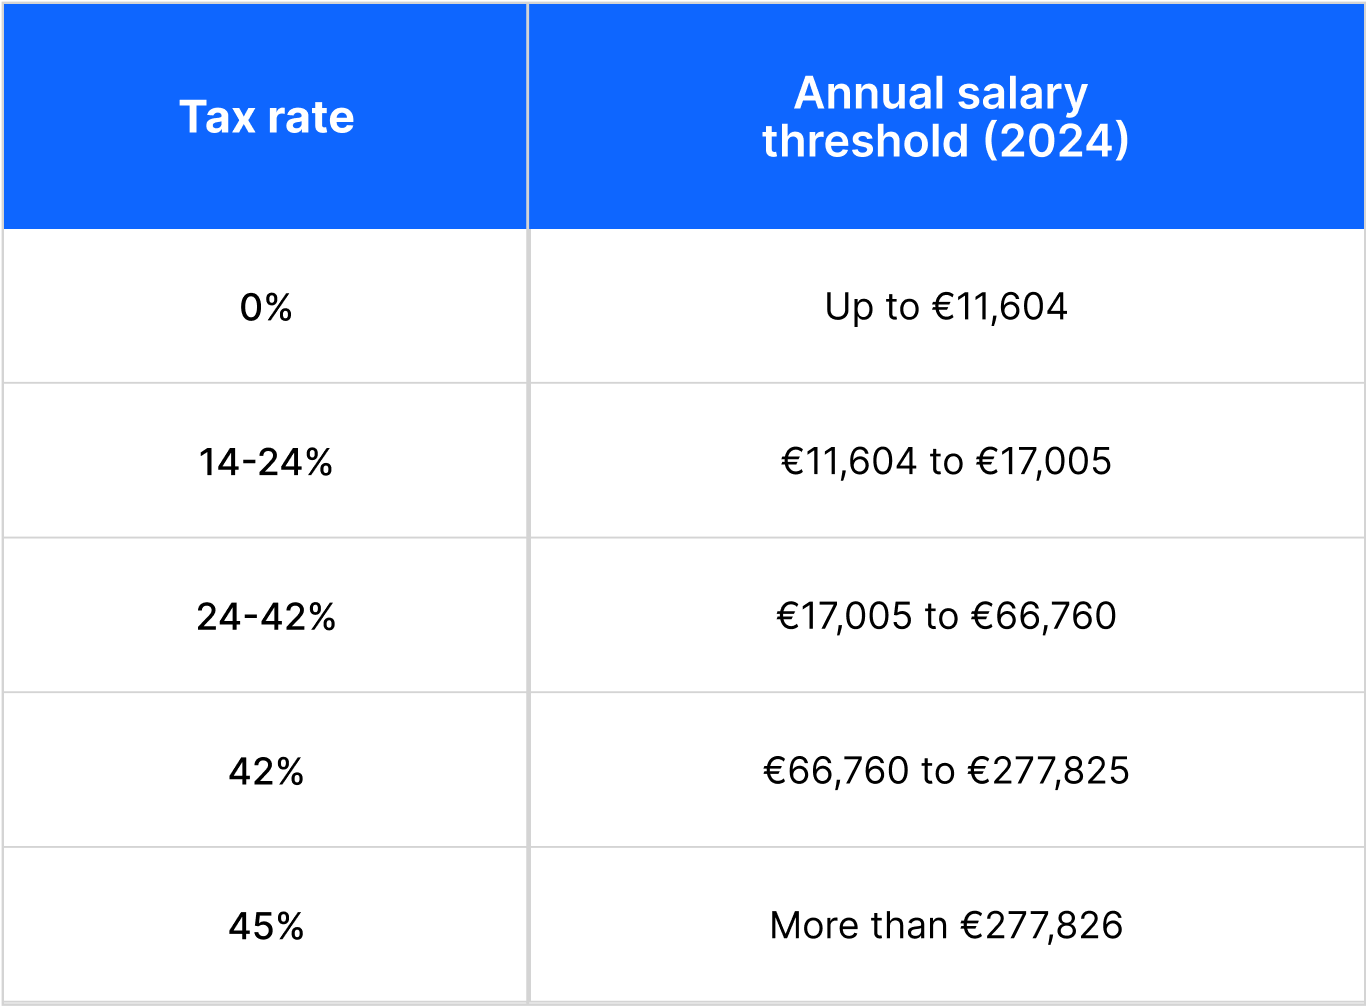 Table showing income tax rates in Germany with the annual salary thresholds for 2024